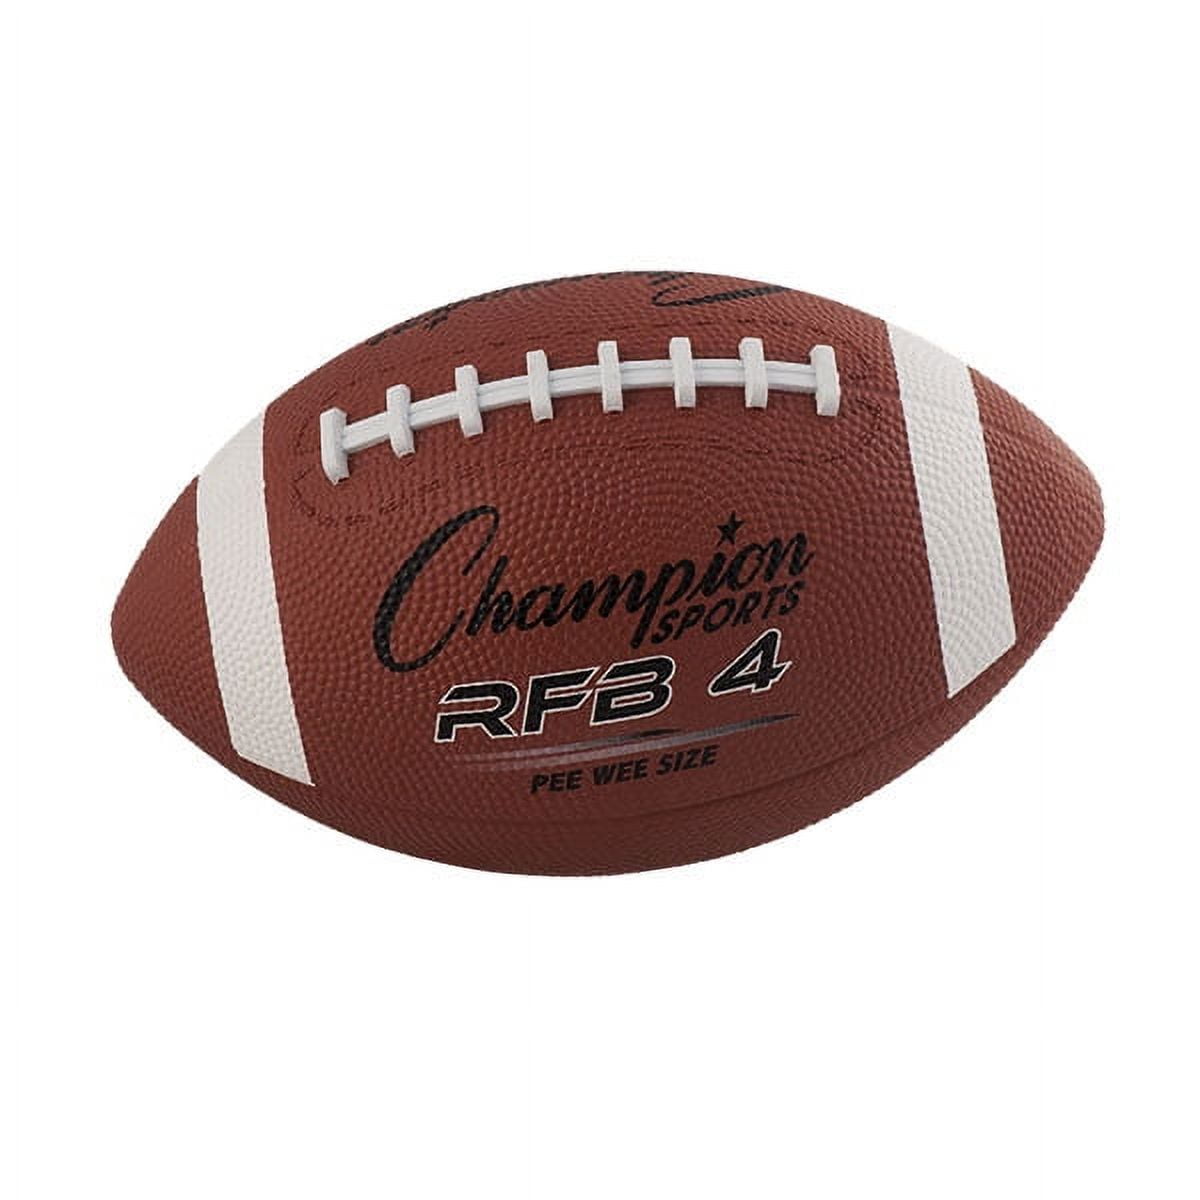 Picture of Champion Sports 20268 Pee Wee Size Rubber Football